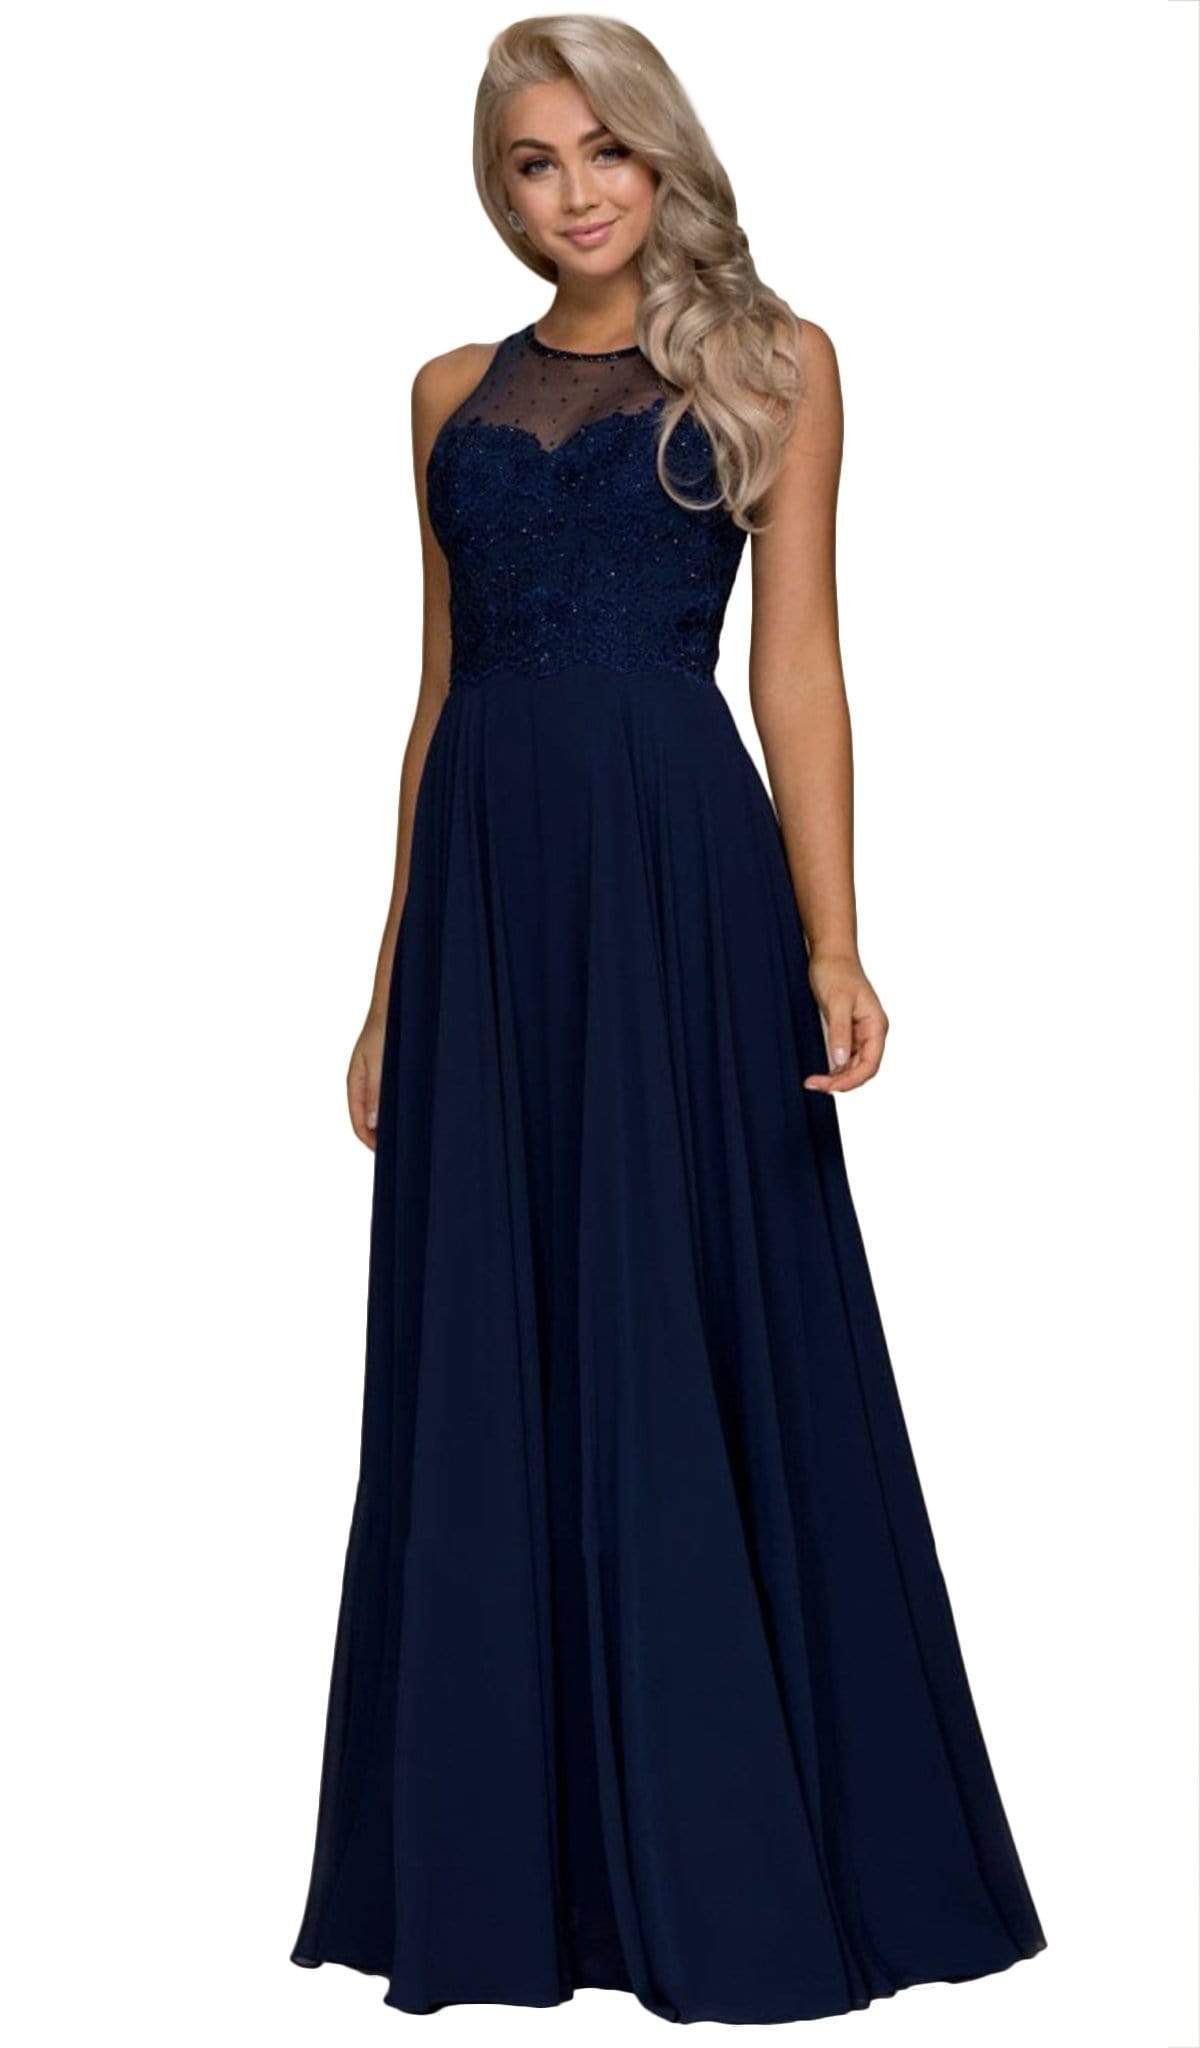 Nox Anabel - Y009 Jeweled Lace Bodice Chiffon A-Line Evening Gown
